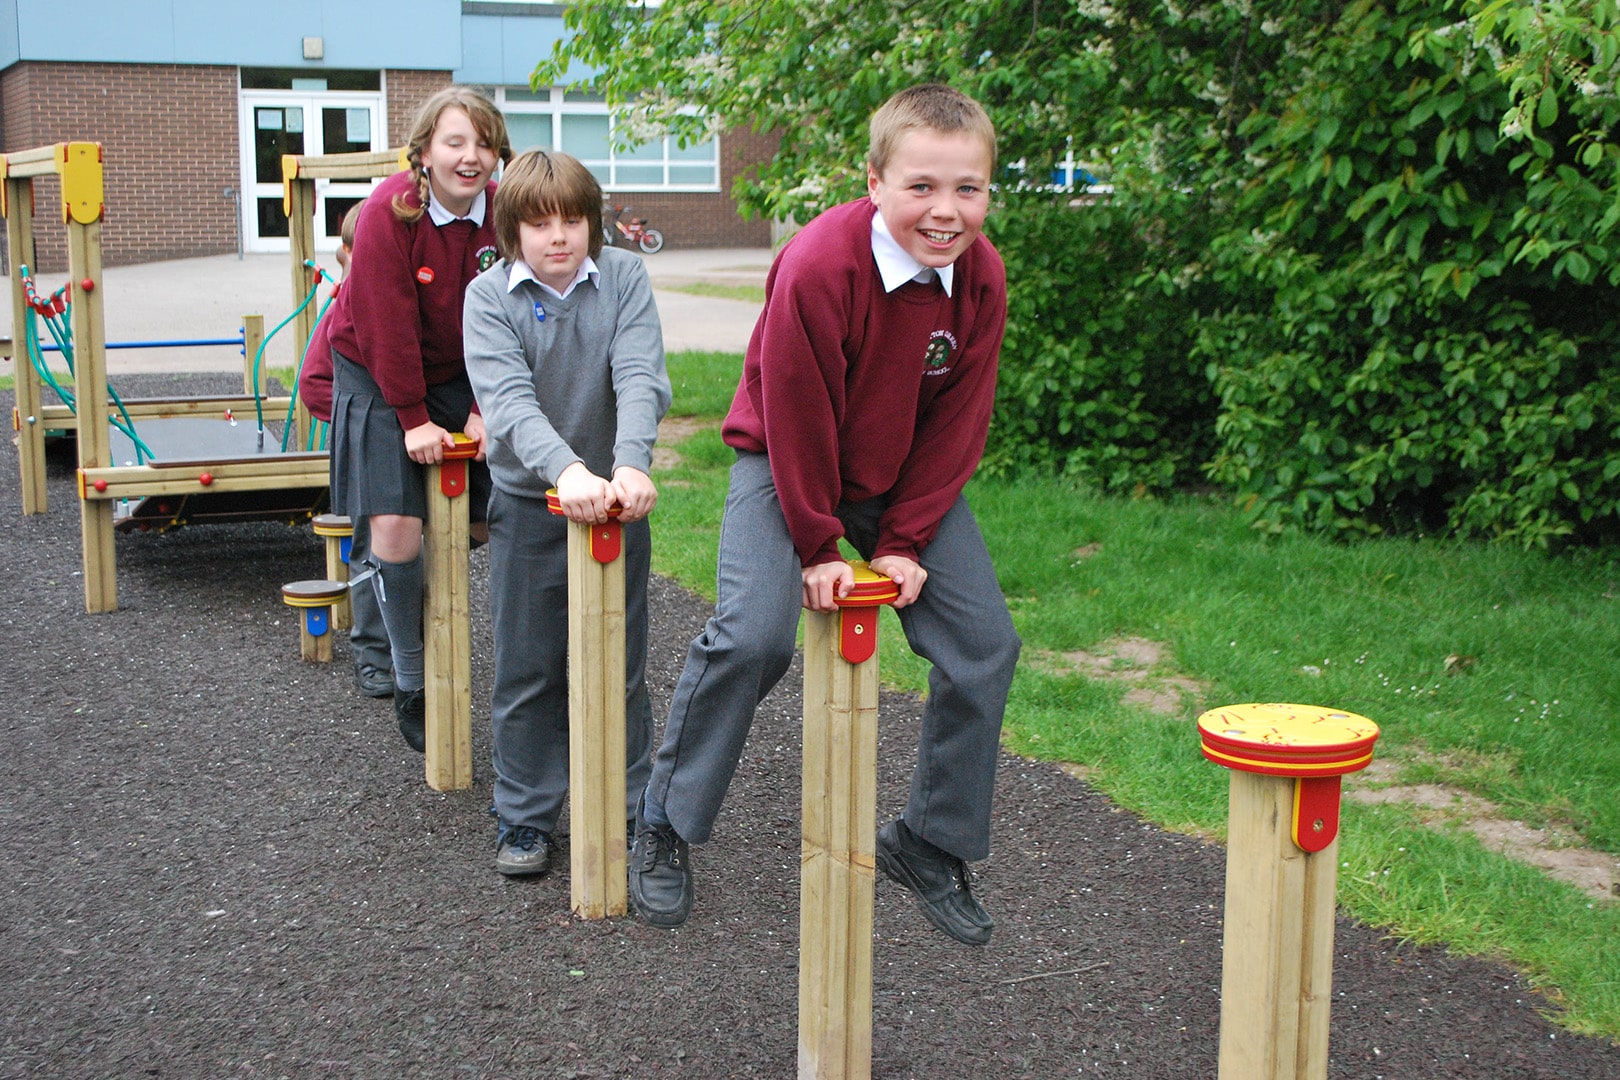 Three children, all in school uniforms, play leapfrog over wooden posts